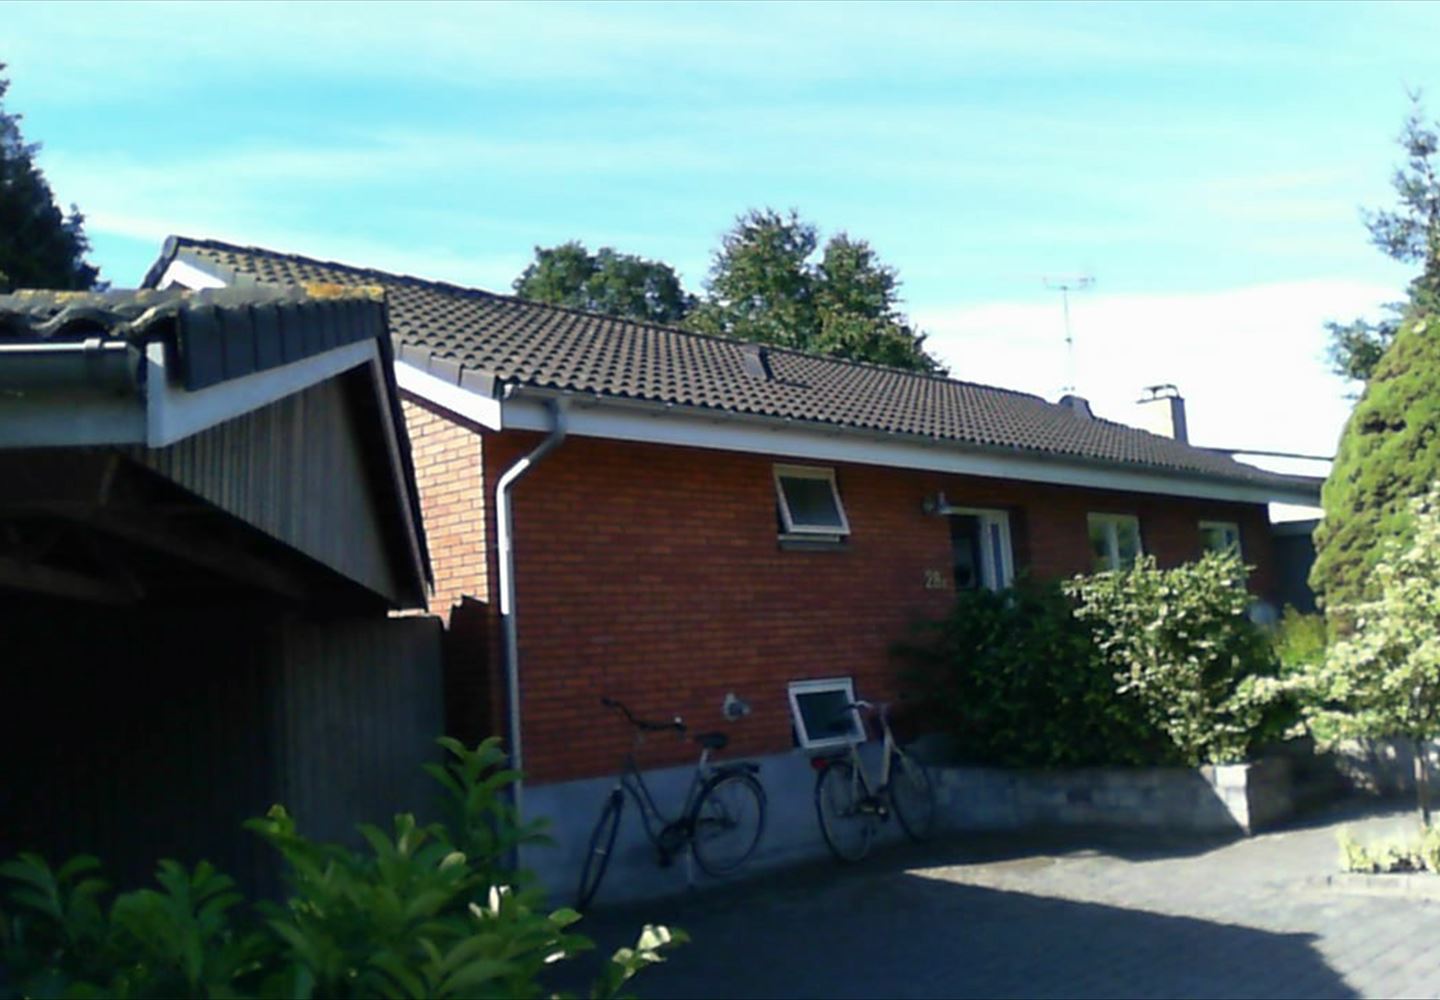 Glaciset 28A, 2800 Kongens Lyngby